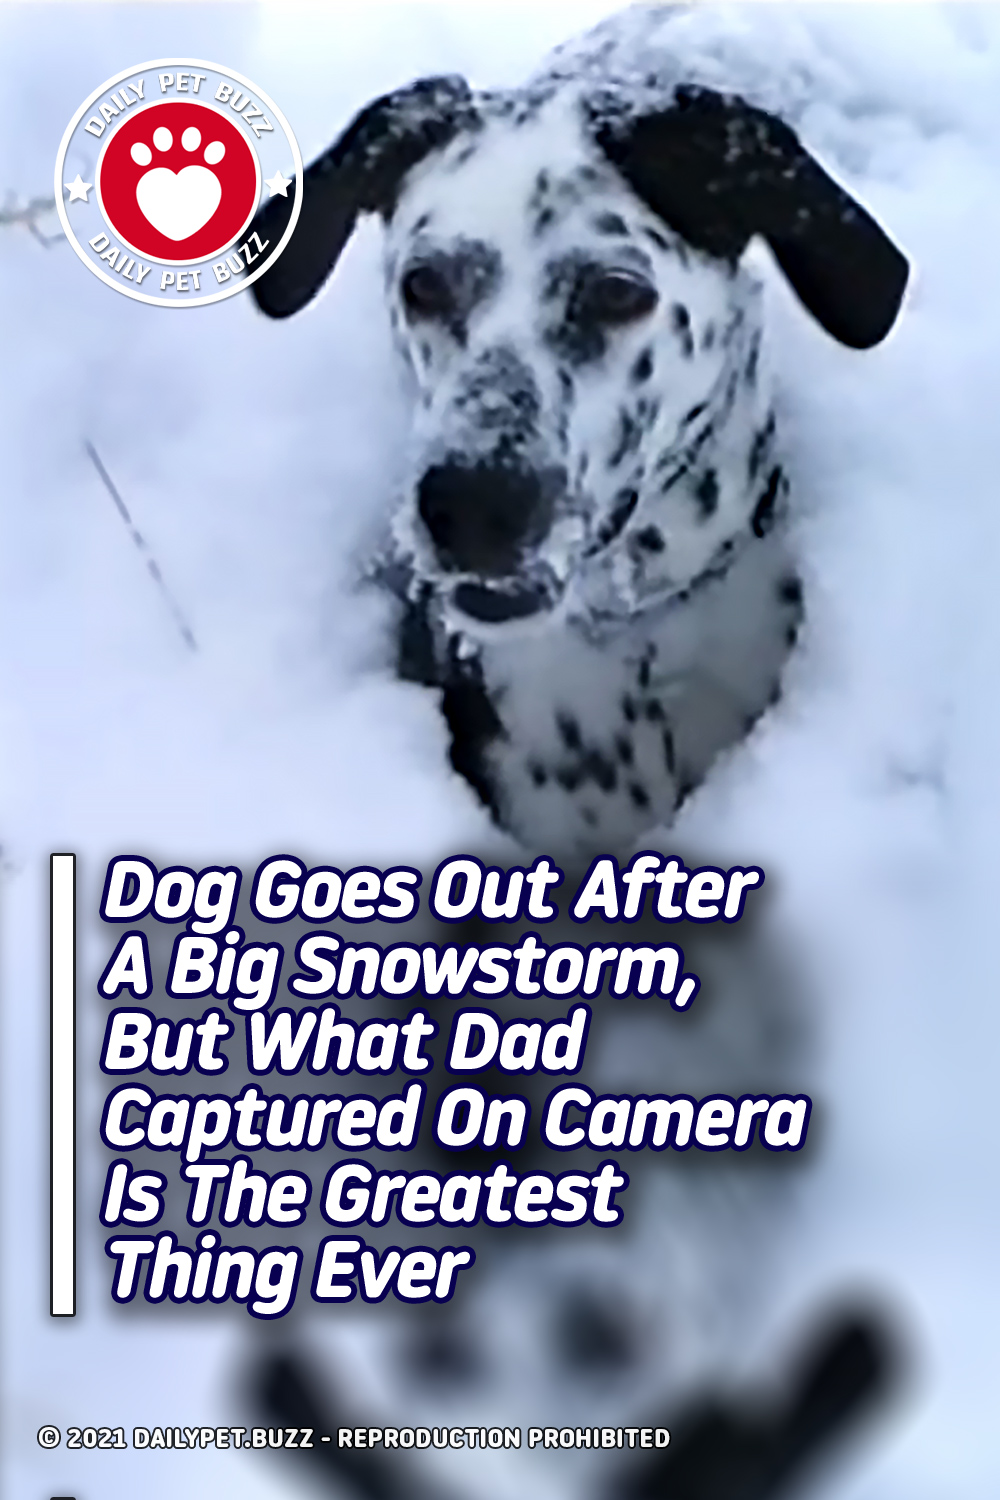 Dog Goes Out After A Big Snowstorm, But What Dad Captured On Camera Is The Greatest Thing Ever